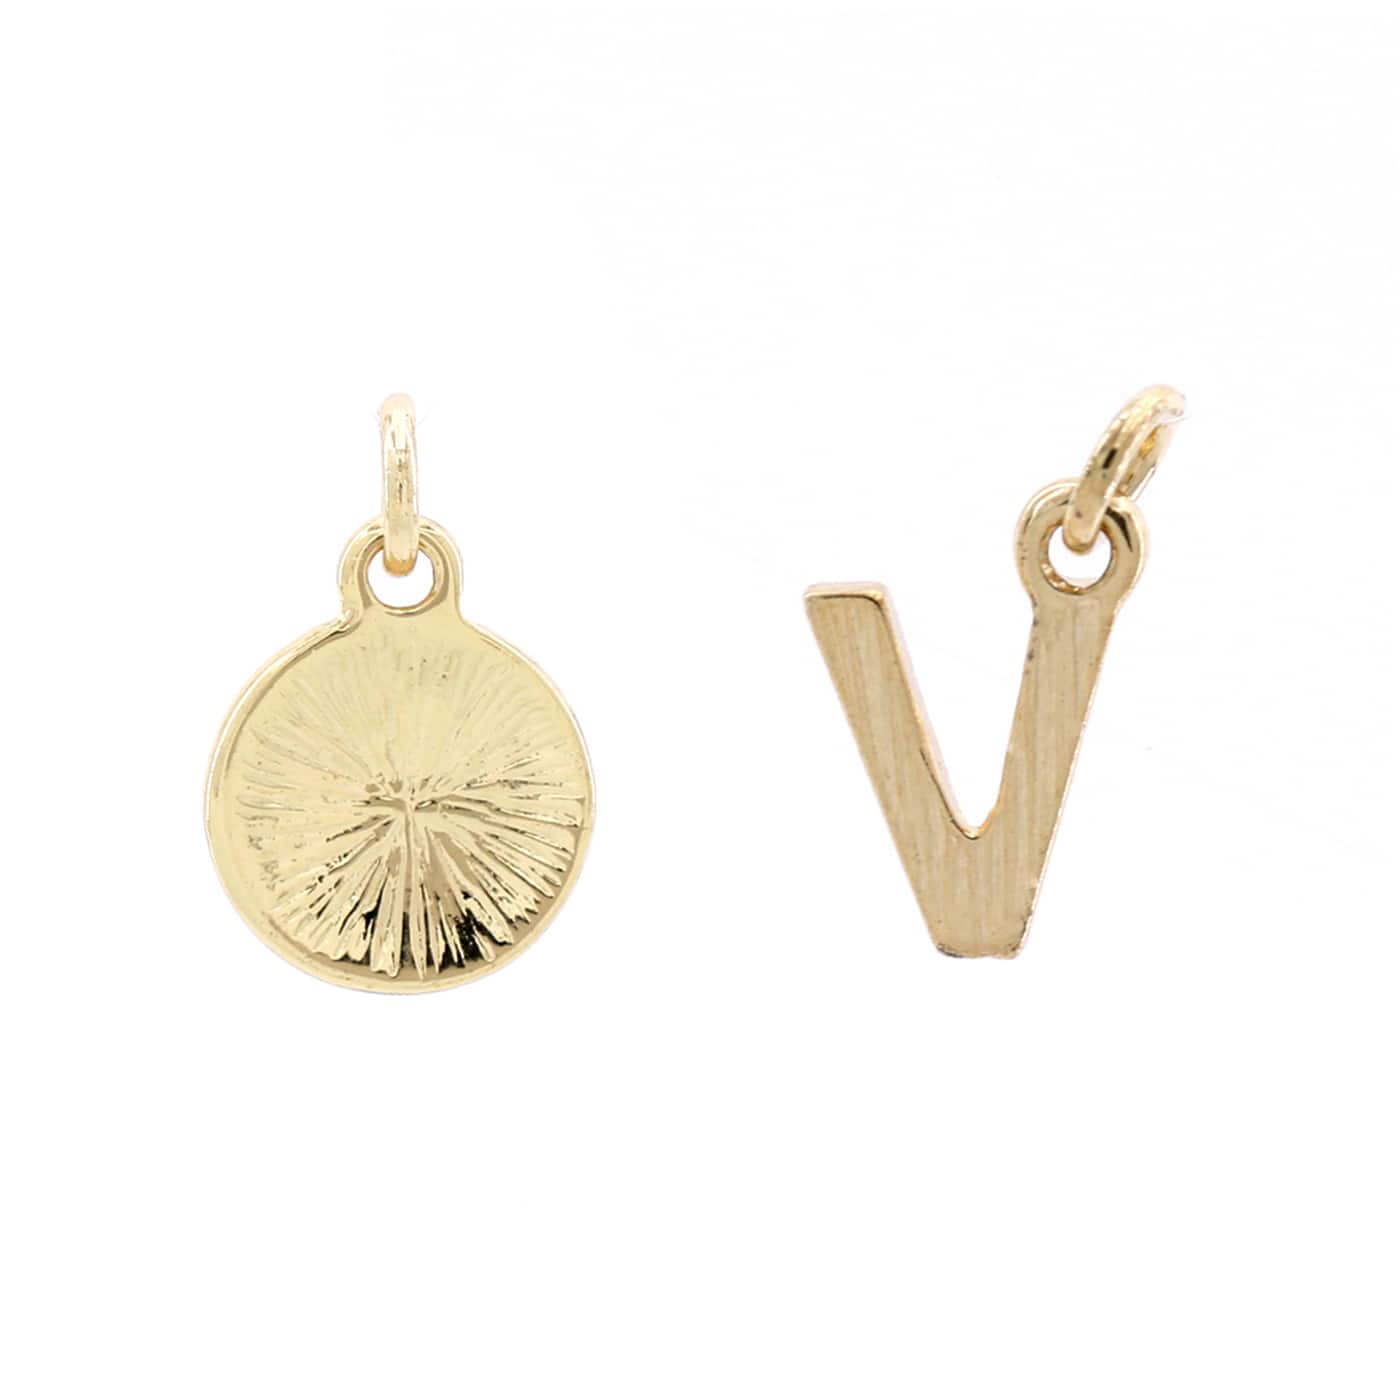 Charmalong&#x2122; 14K Gold Plated Letter Charms by Bead Landing&#x2122;